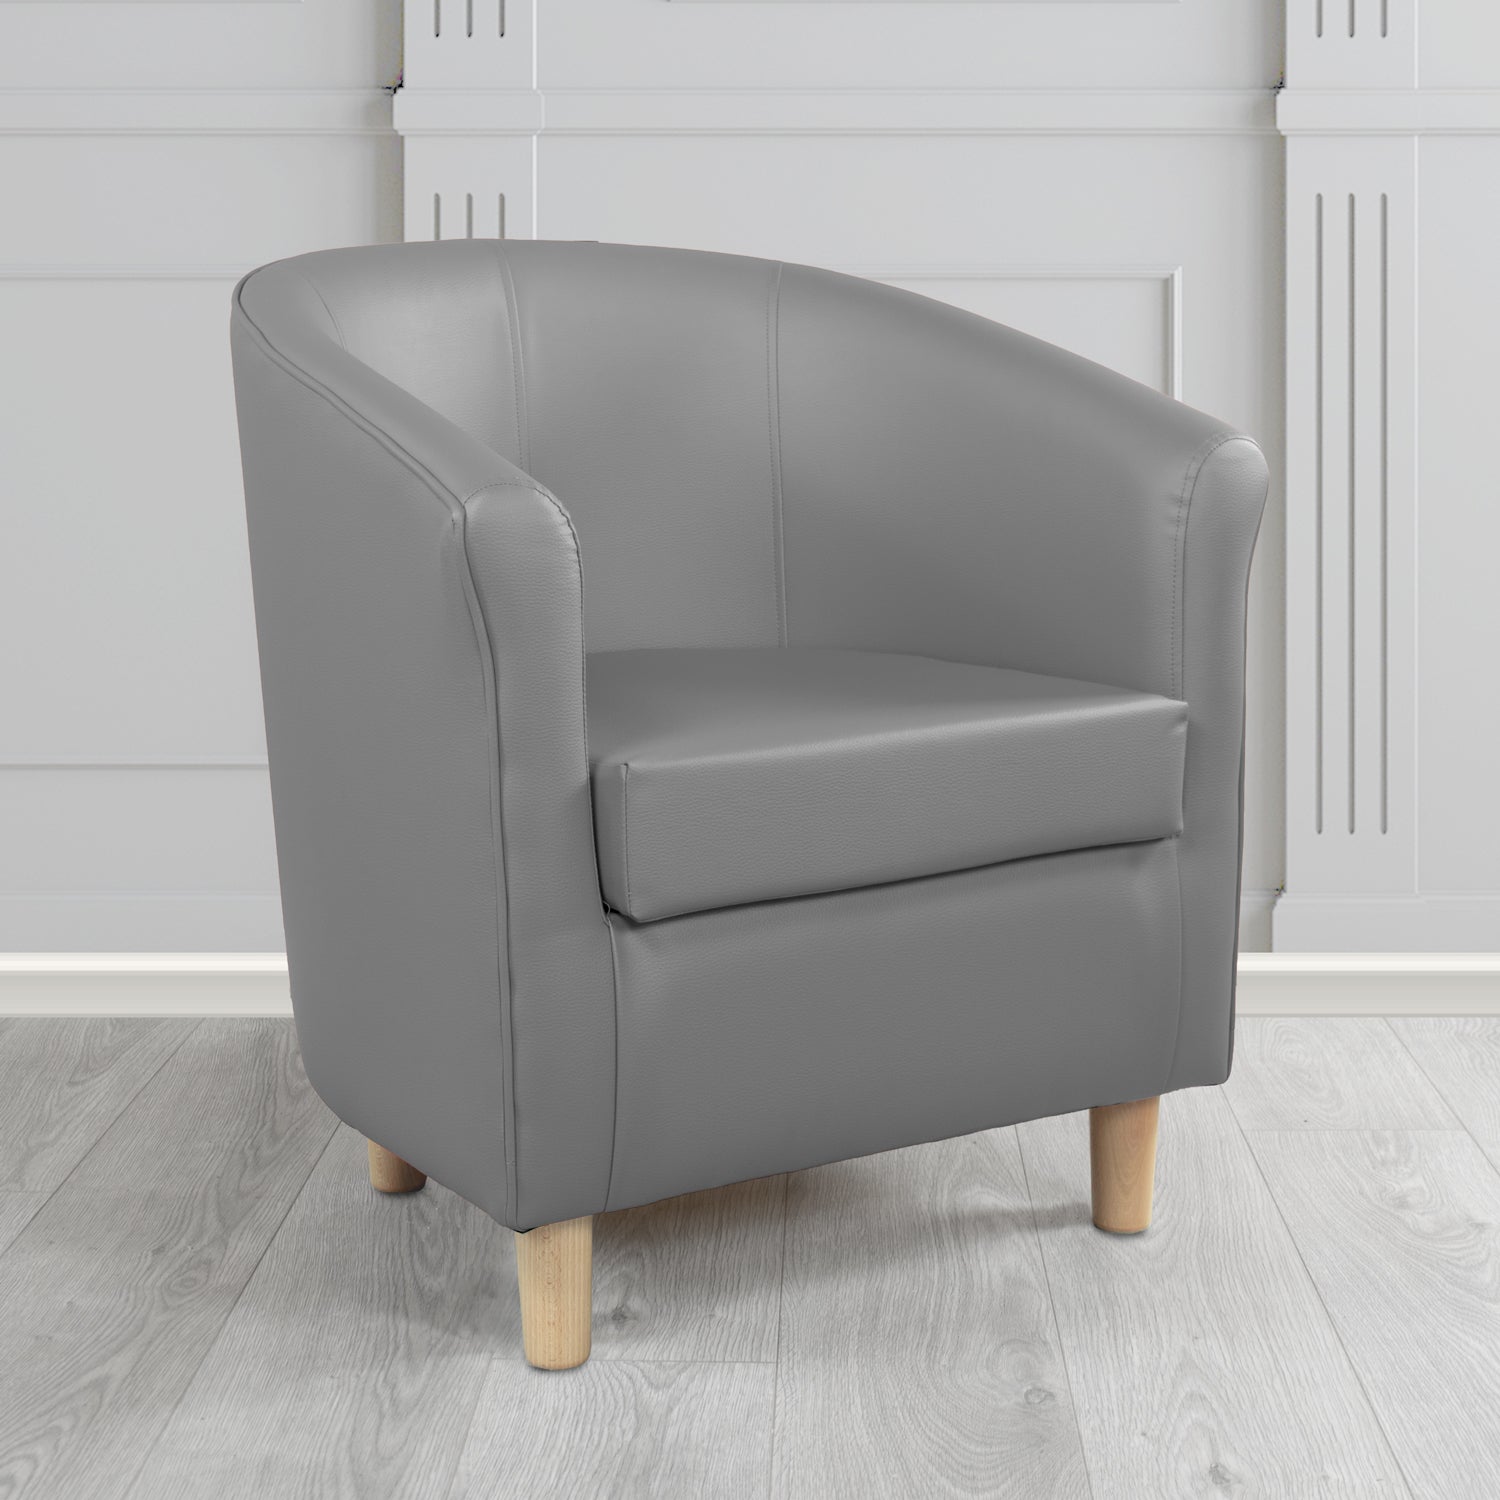 Tuscany Just Colour Battleship Antimicrobial Crib 5 Contract Faux Leather Tub Chair - The Tub Chair Shop